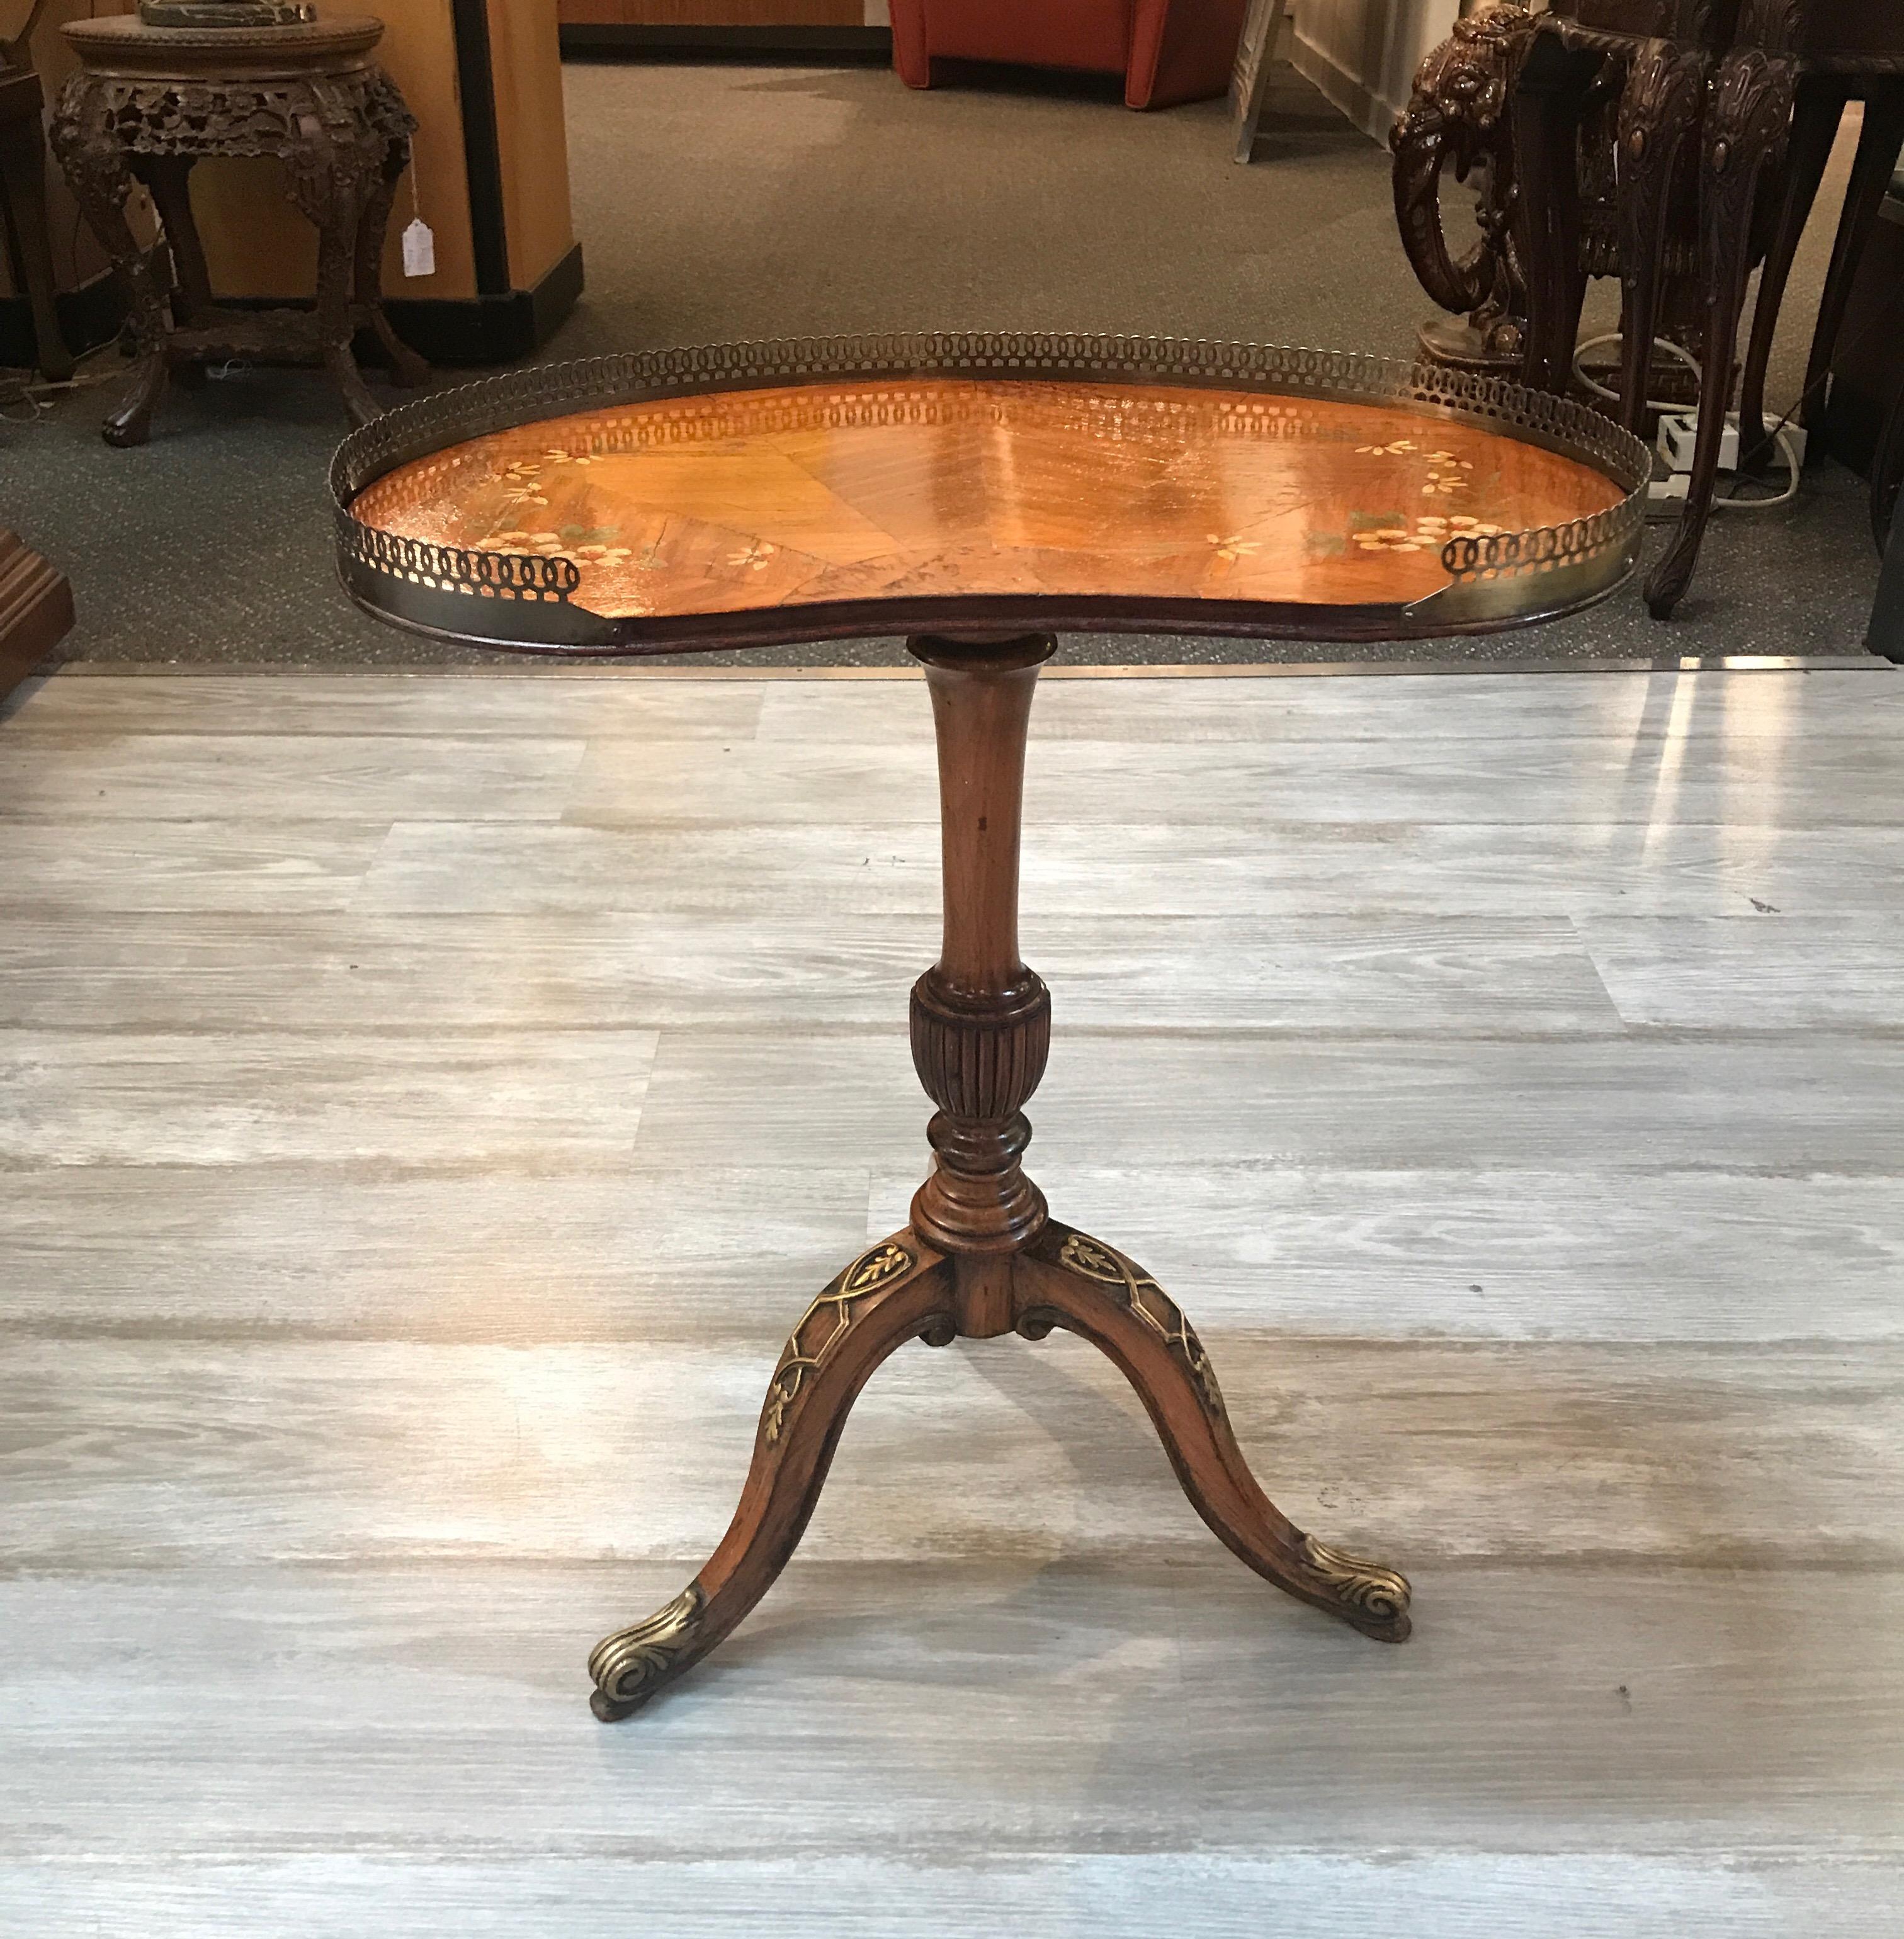 Graceful diminutive English Adam style drinks table with reticulated brass gallery edge. The kidney shaped top in a mellow satinwood with hand painted decoration around the edge. The hand carved base with center urn form column on three gracefully